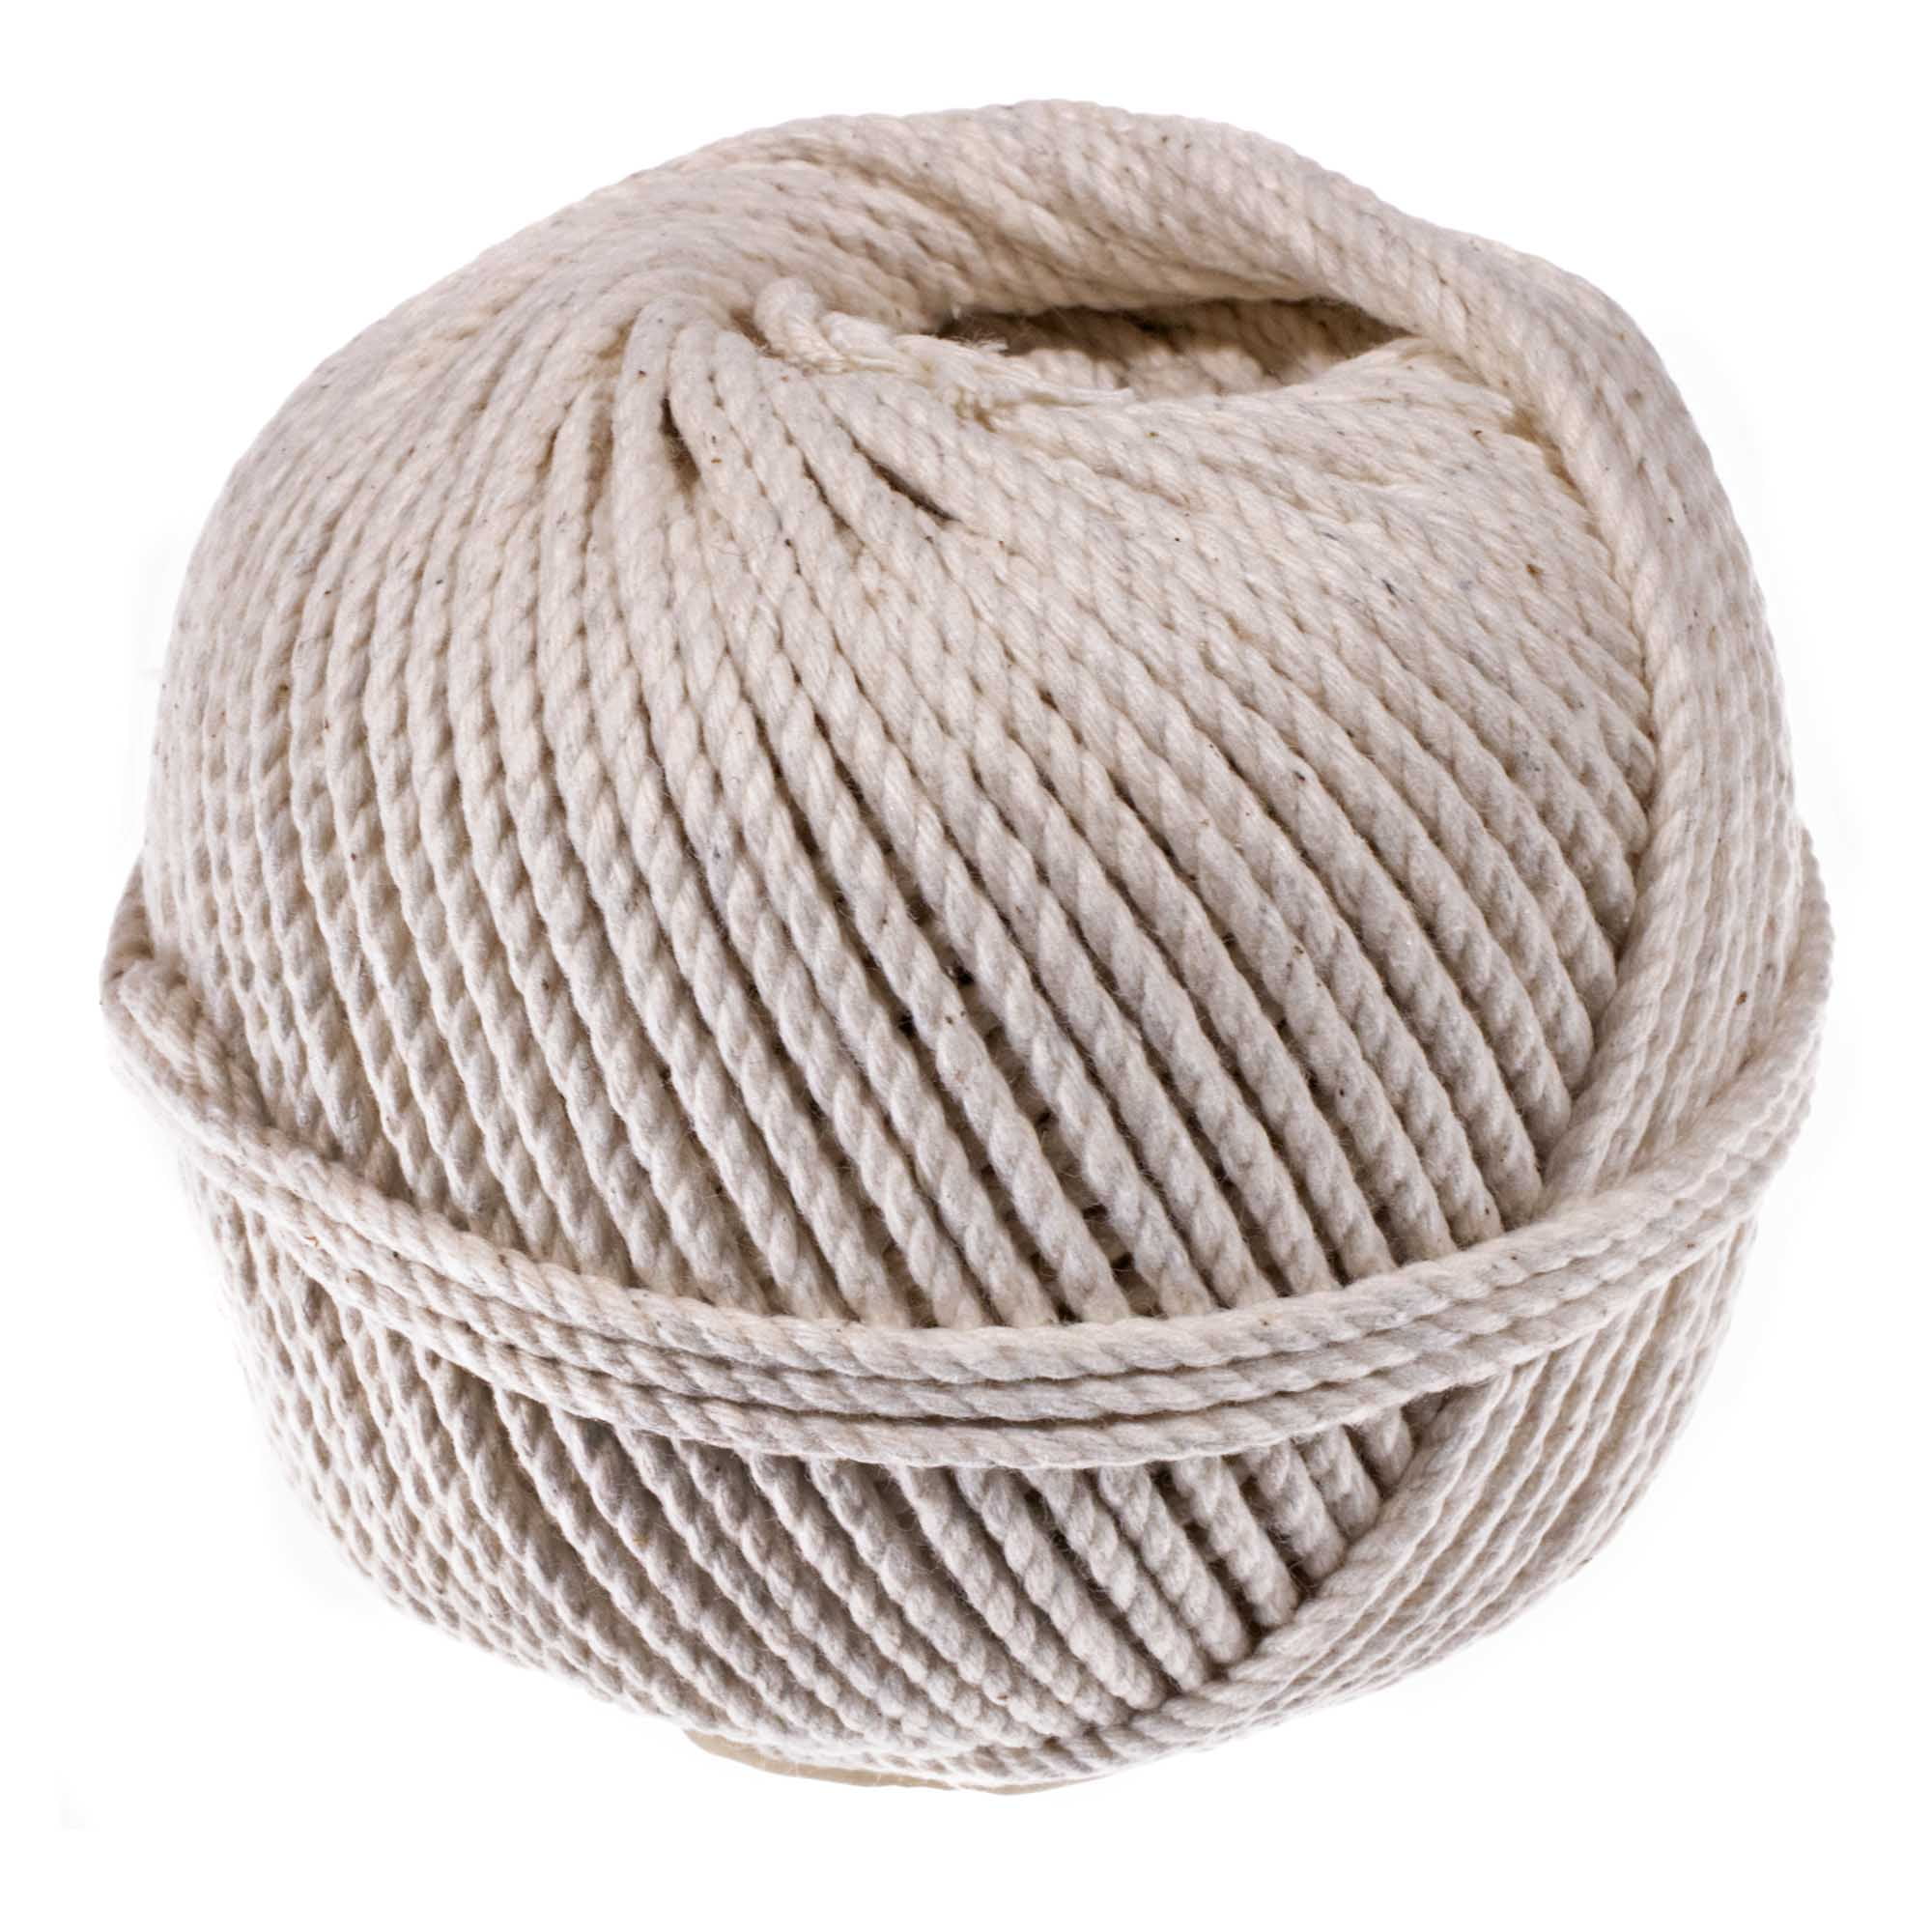 Rope 100% Cotton Braided White Natural Garden Craft All Width Roll 30 MTR metre 